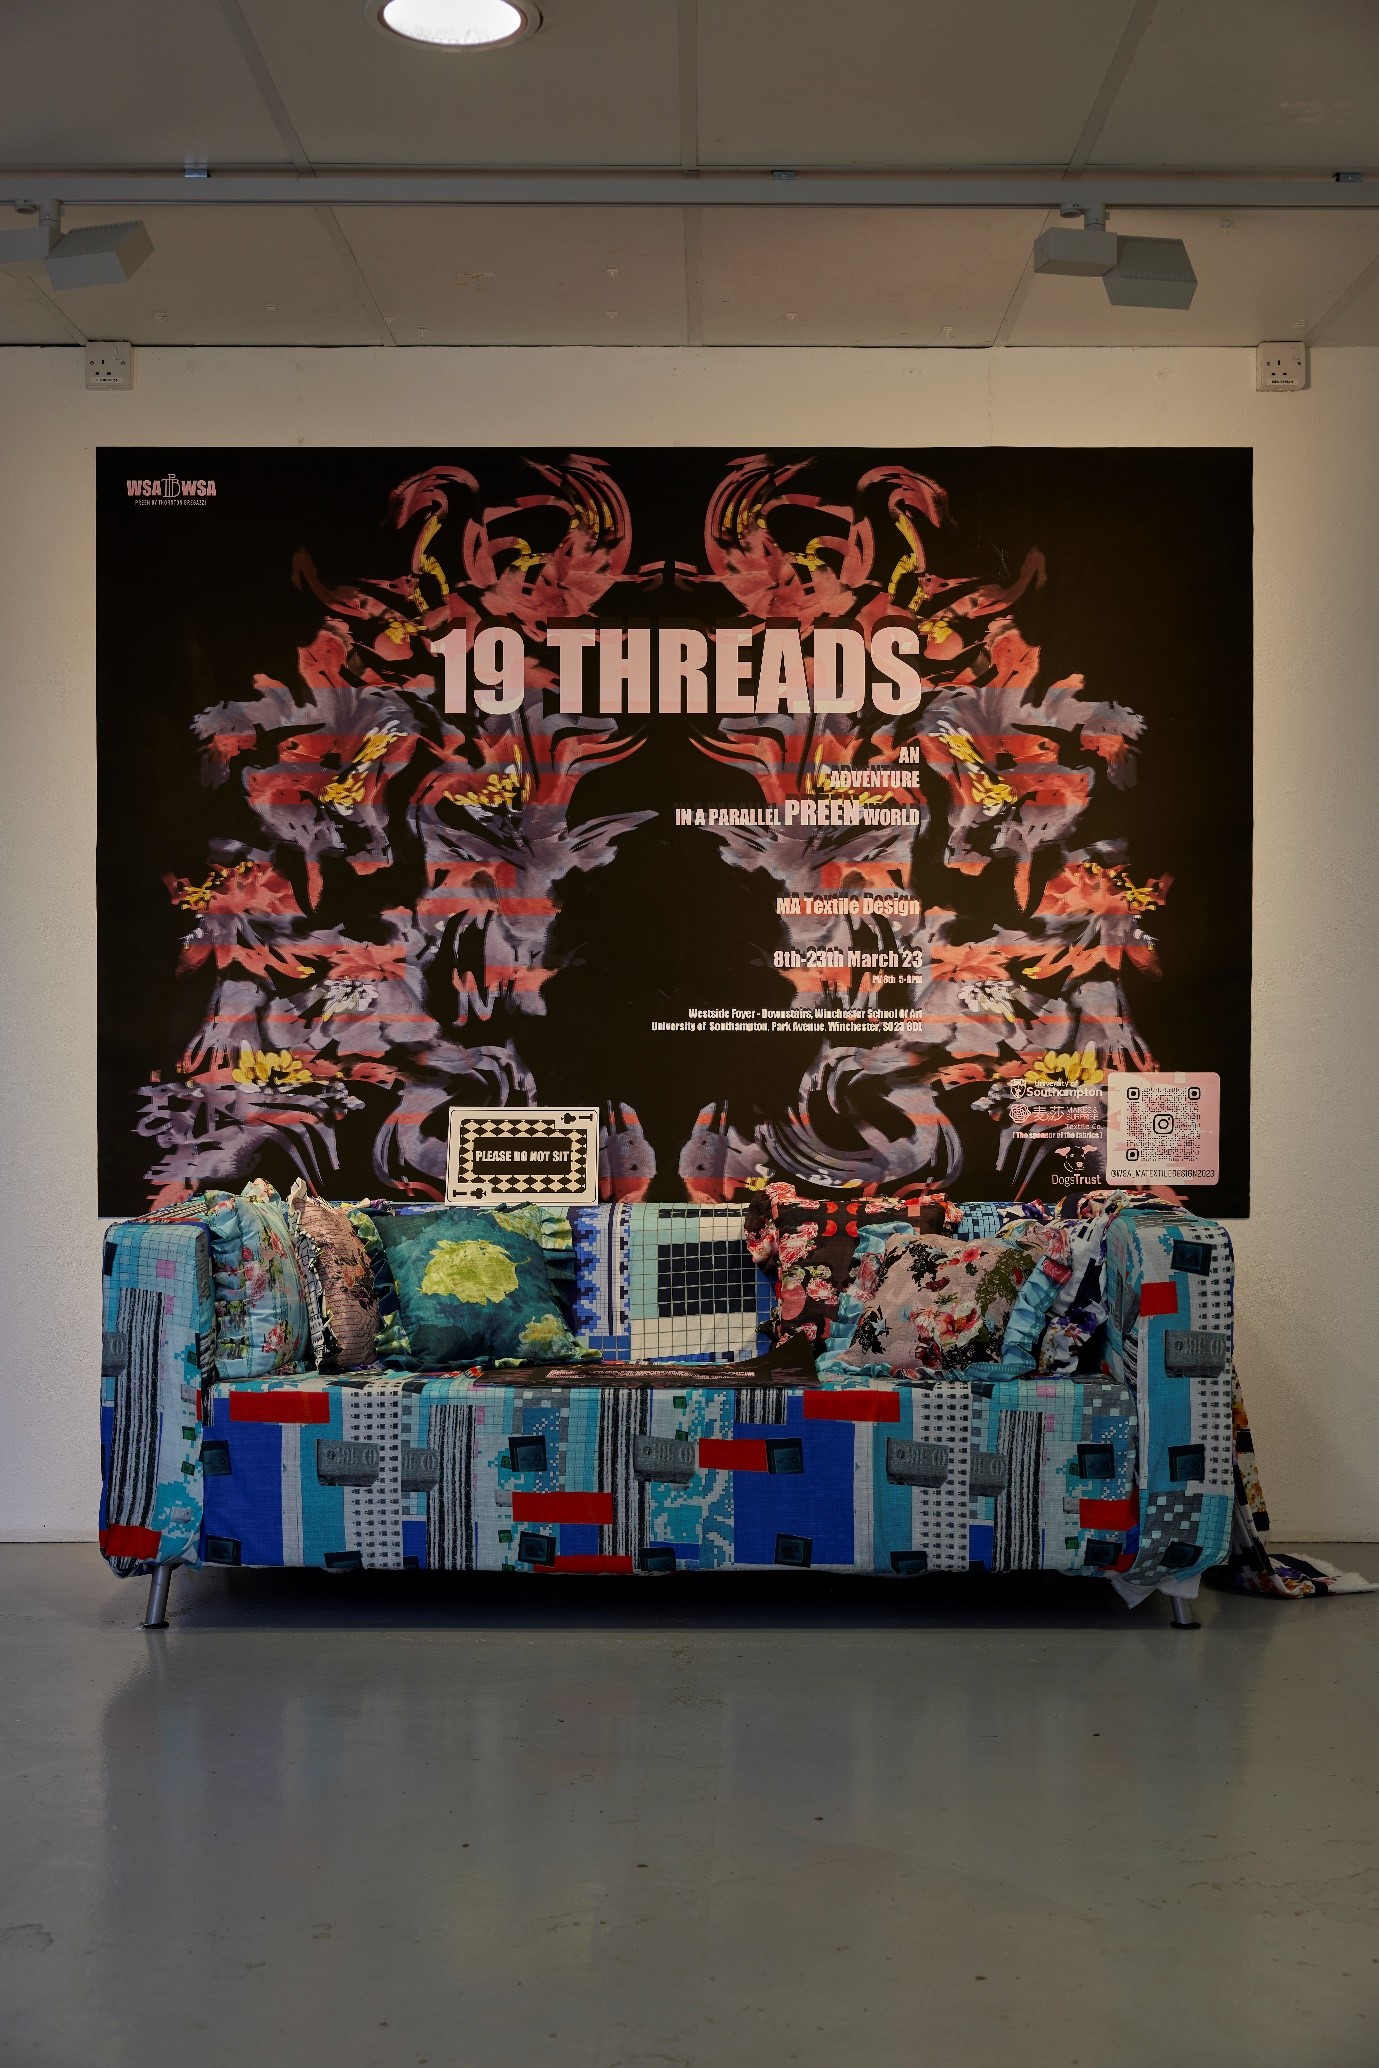 Work exhibited at the 19 Threads in